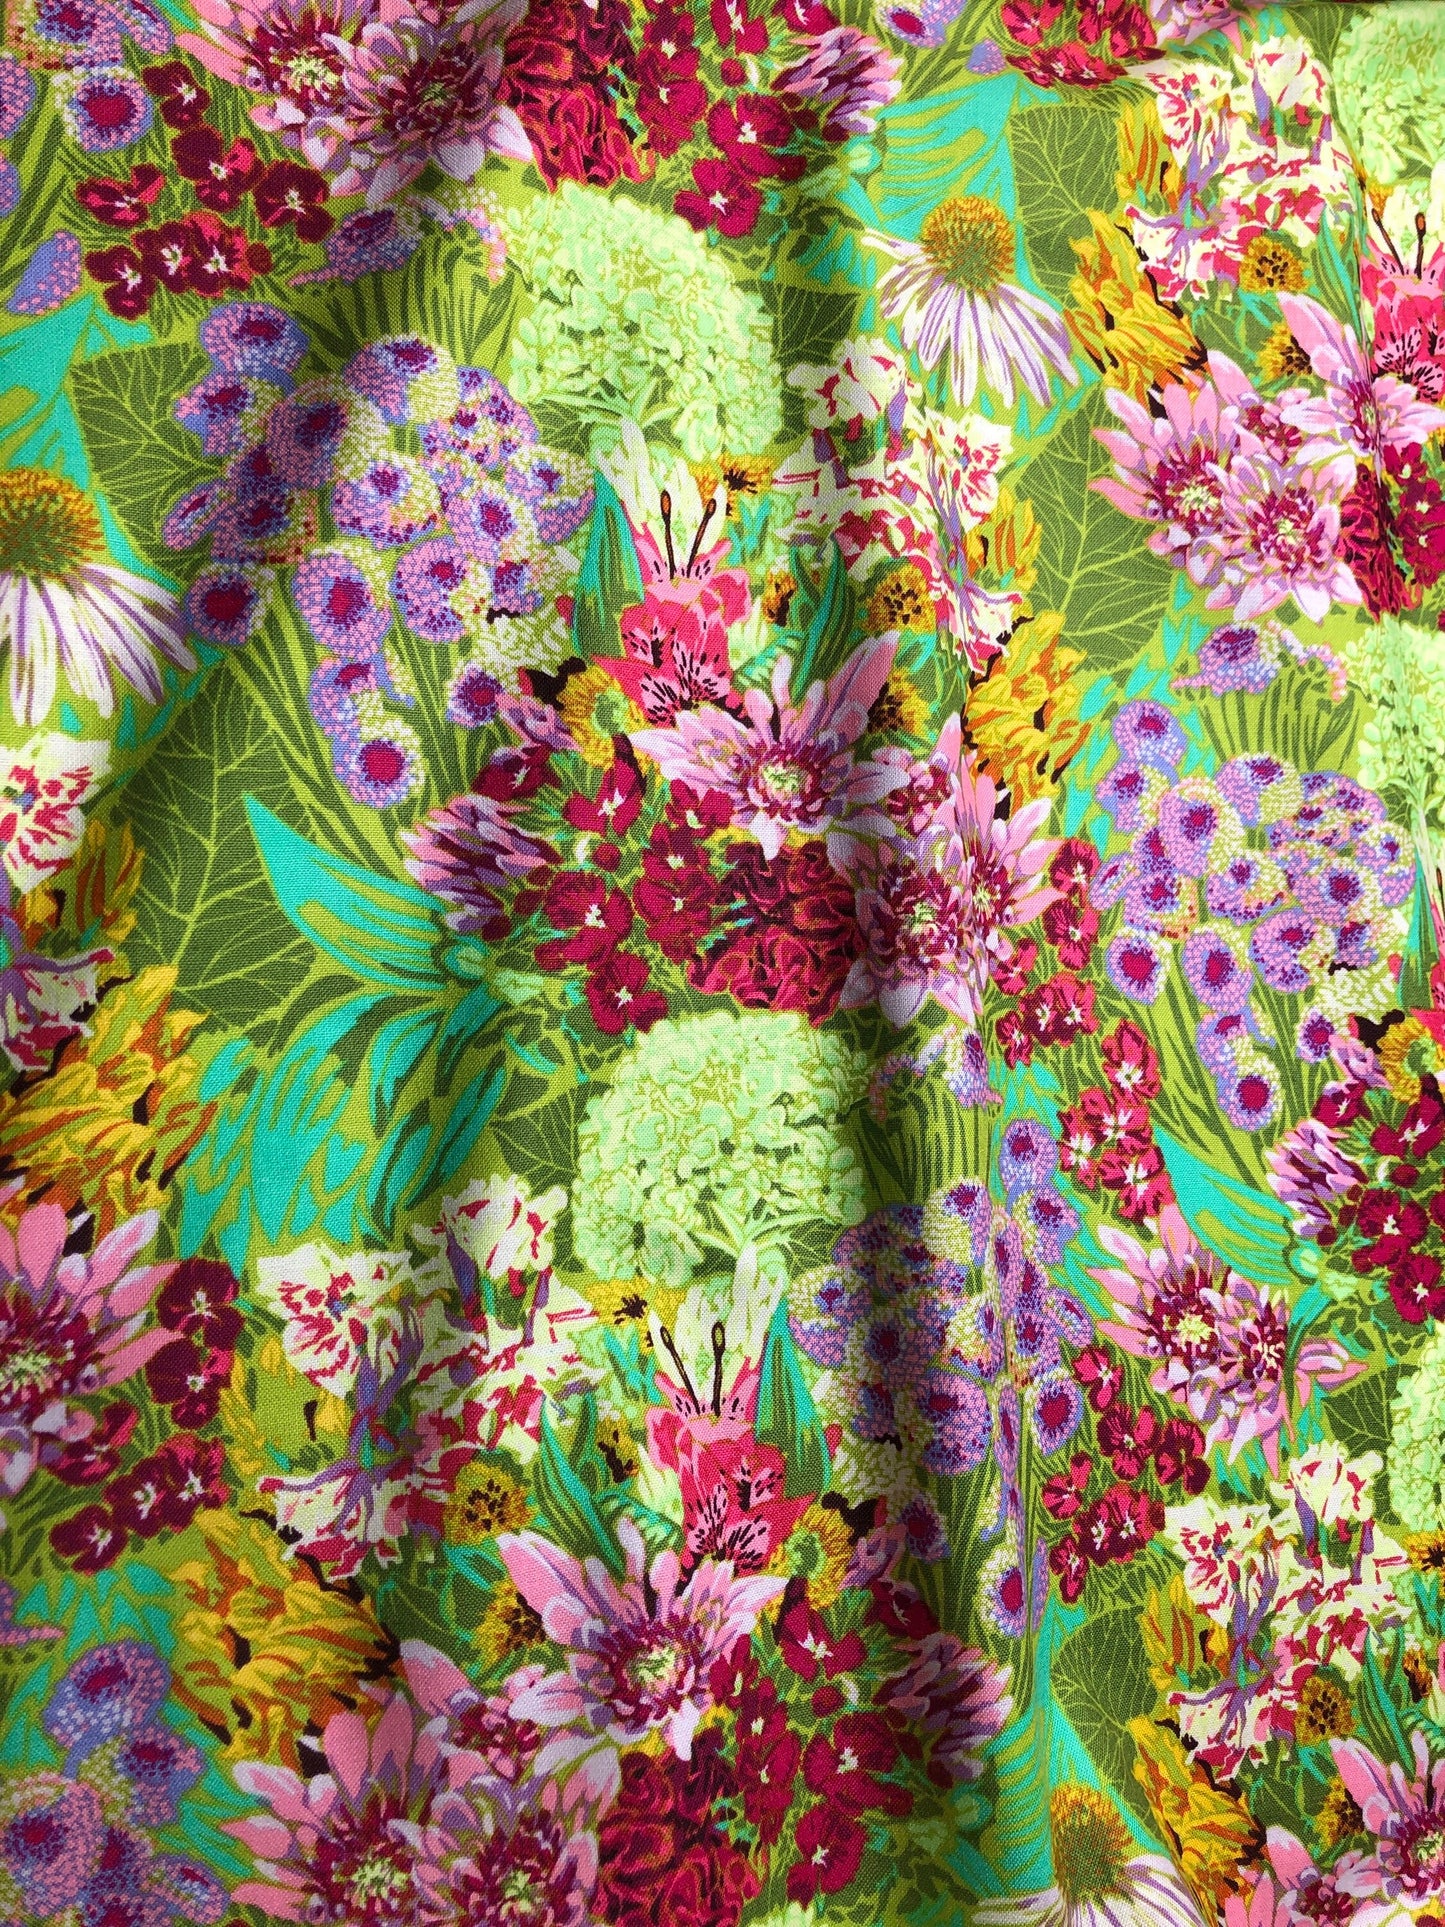 Made My Day SECRET ADMIRER GLANCE Pwah169 Anna Maria Horner, Free Spirit Fabrics, Quilt Fabric, Floral, Cotton Fabric, Fabric By The Yard